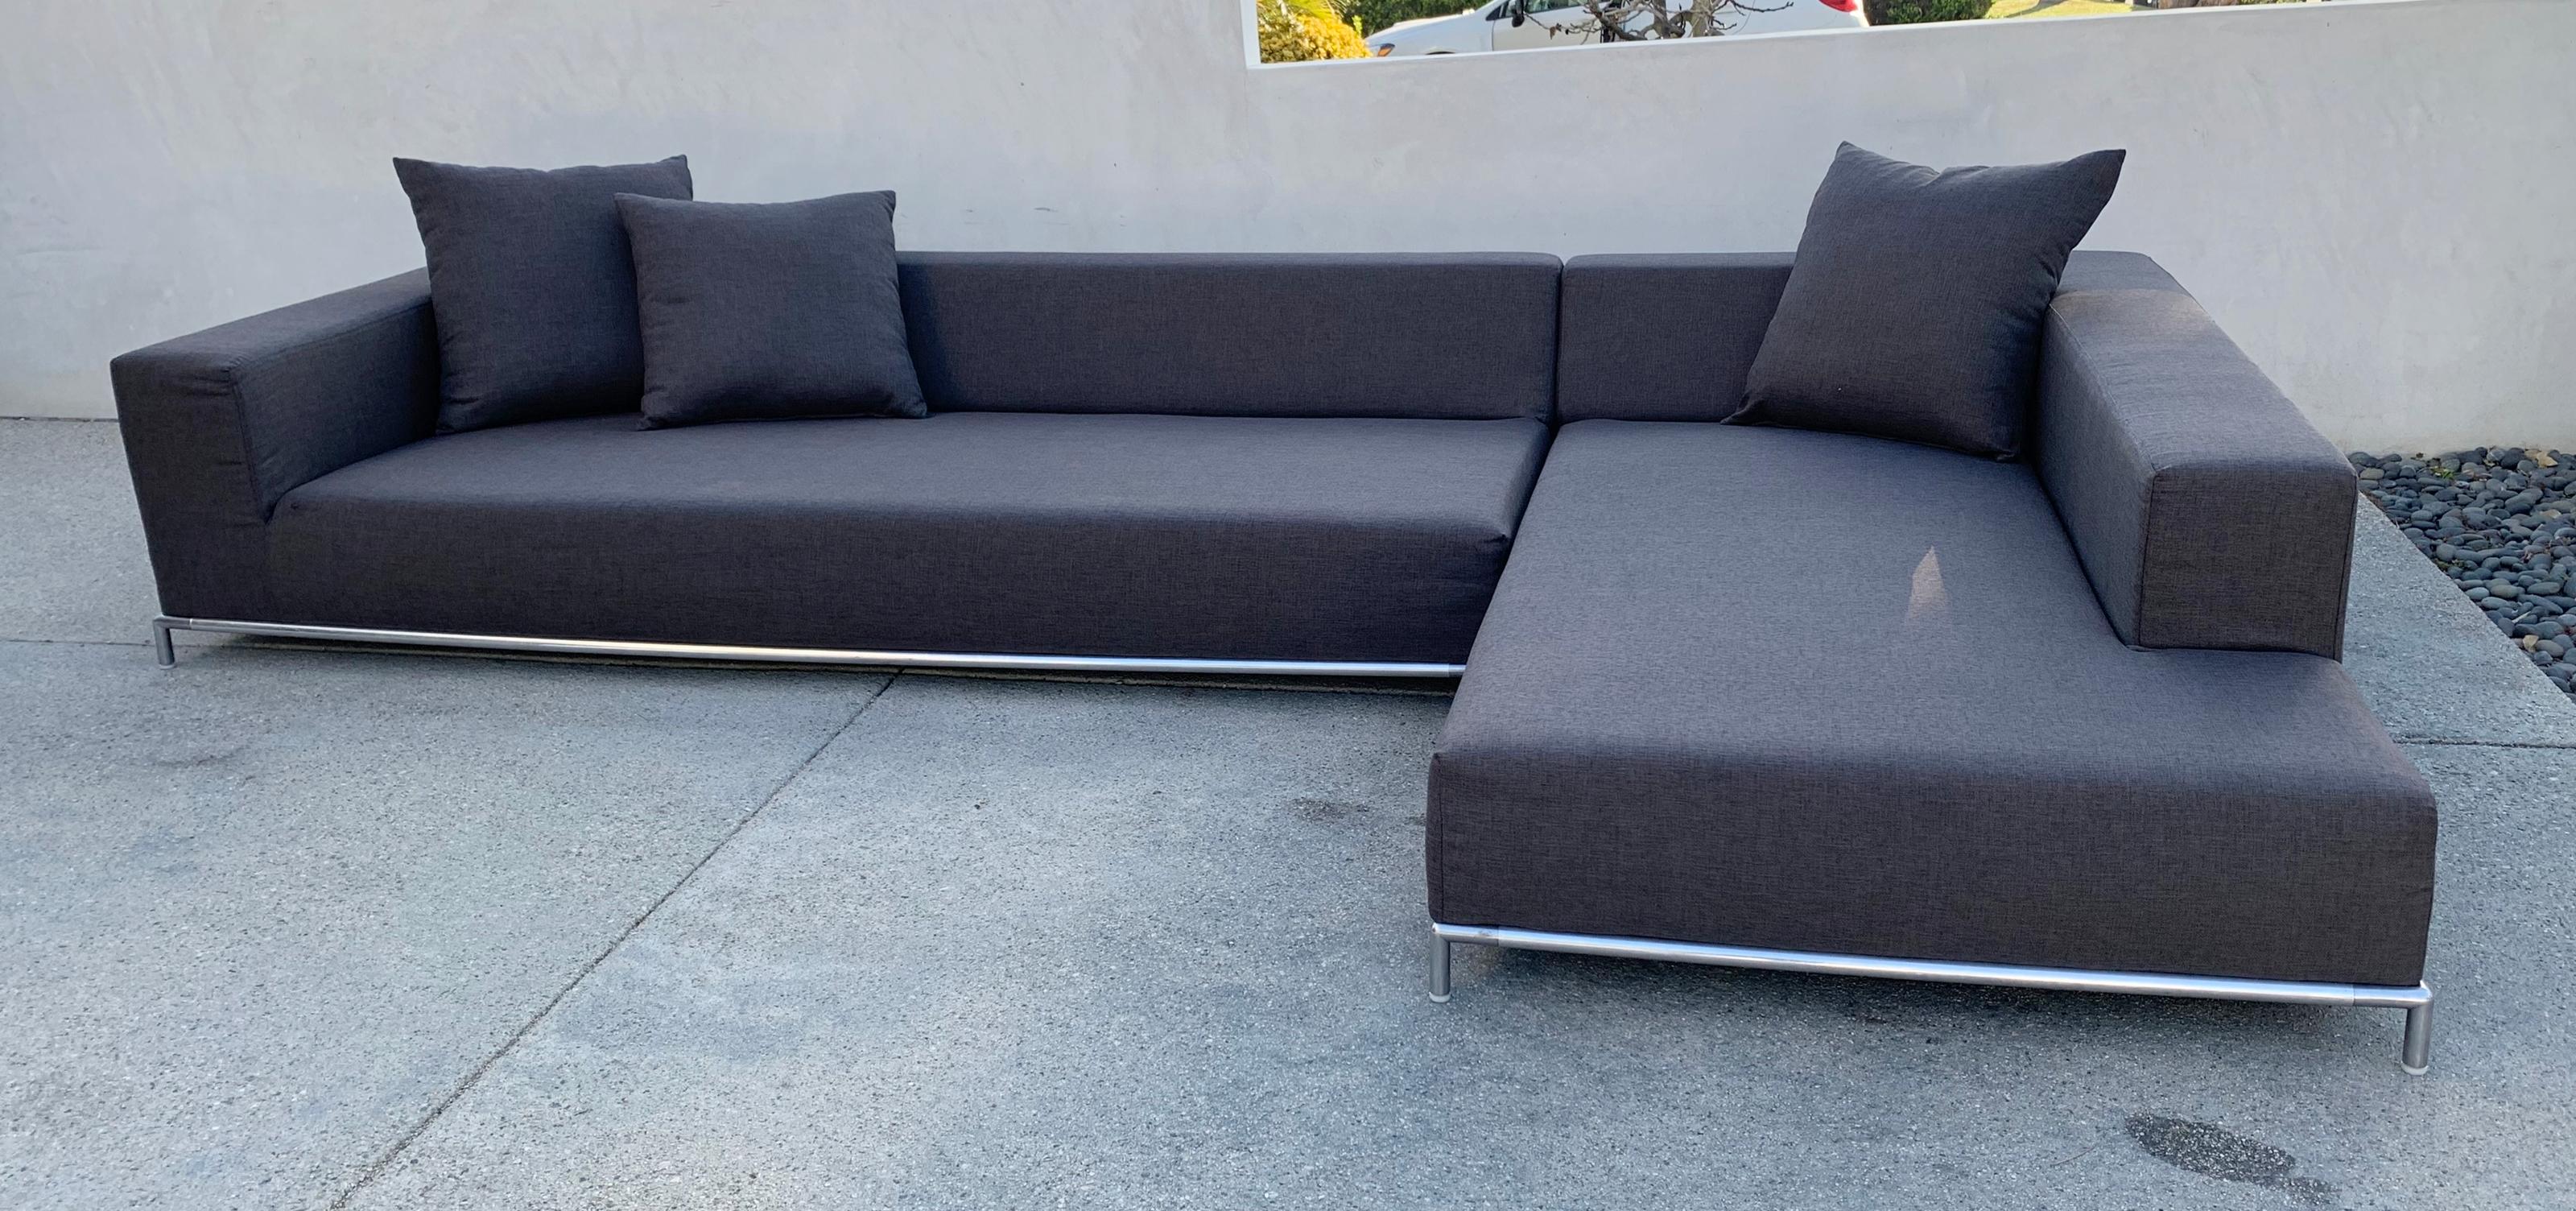 Stunning and beautiful two-piece sectional sofa from the 